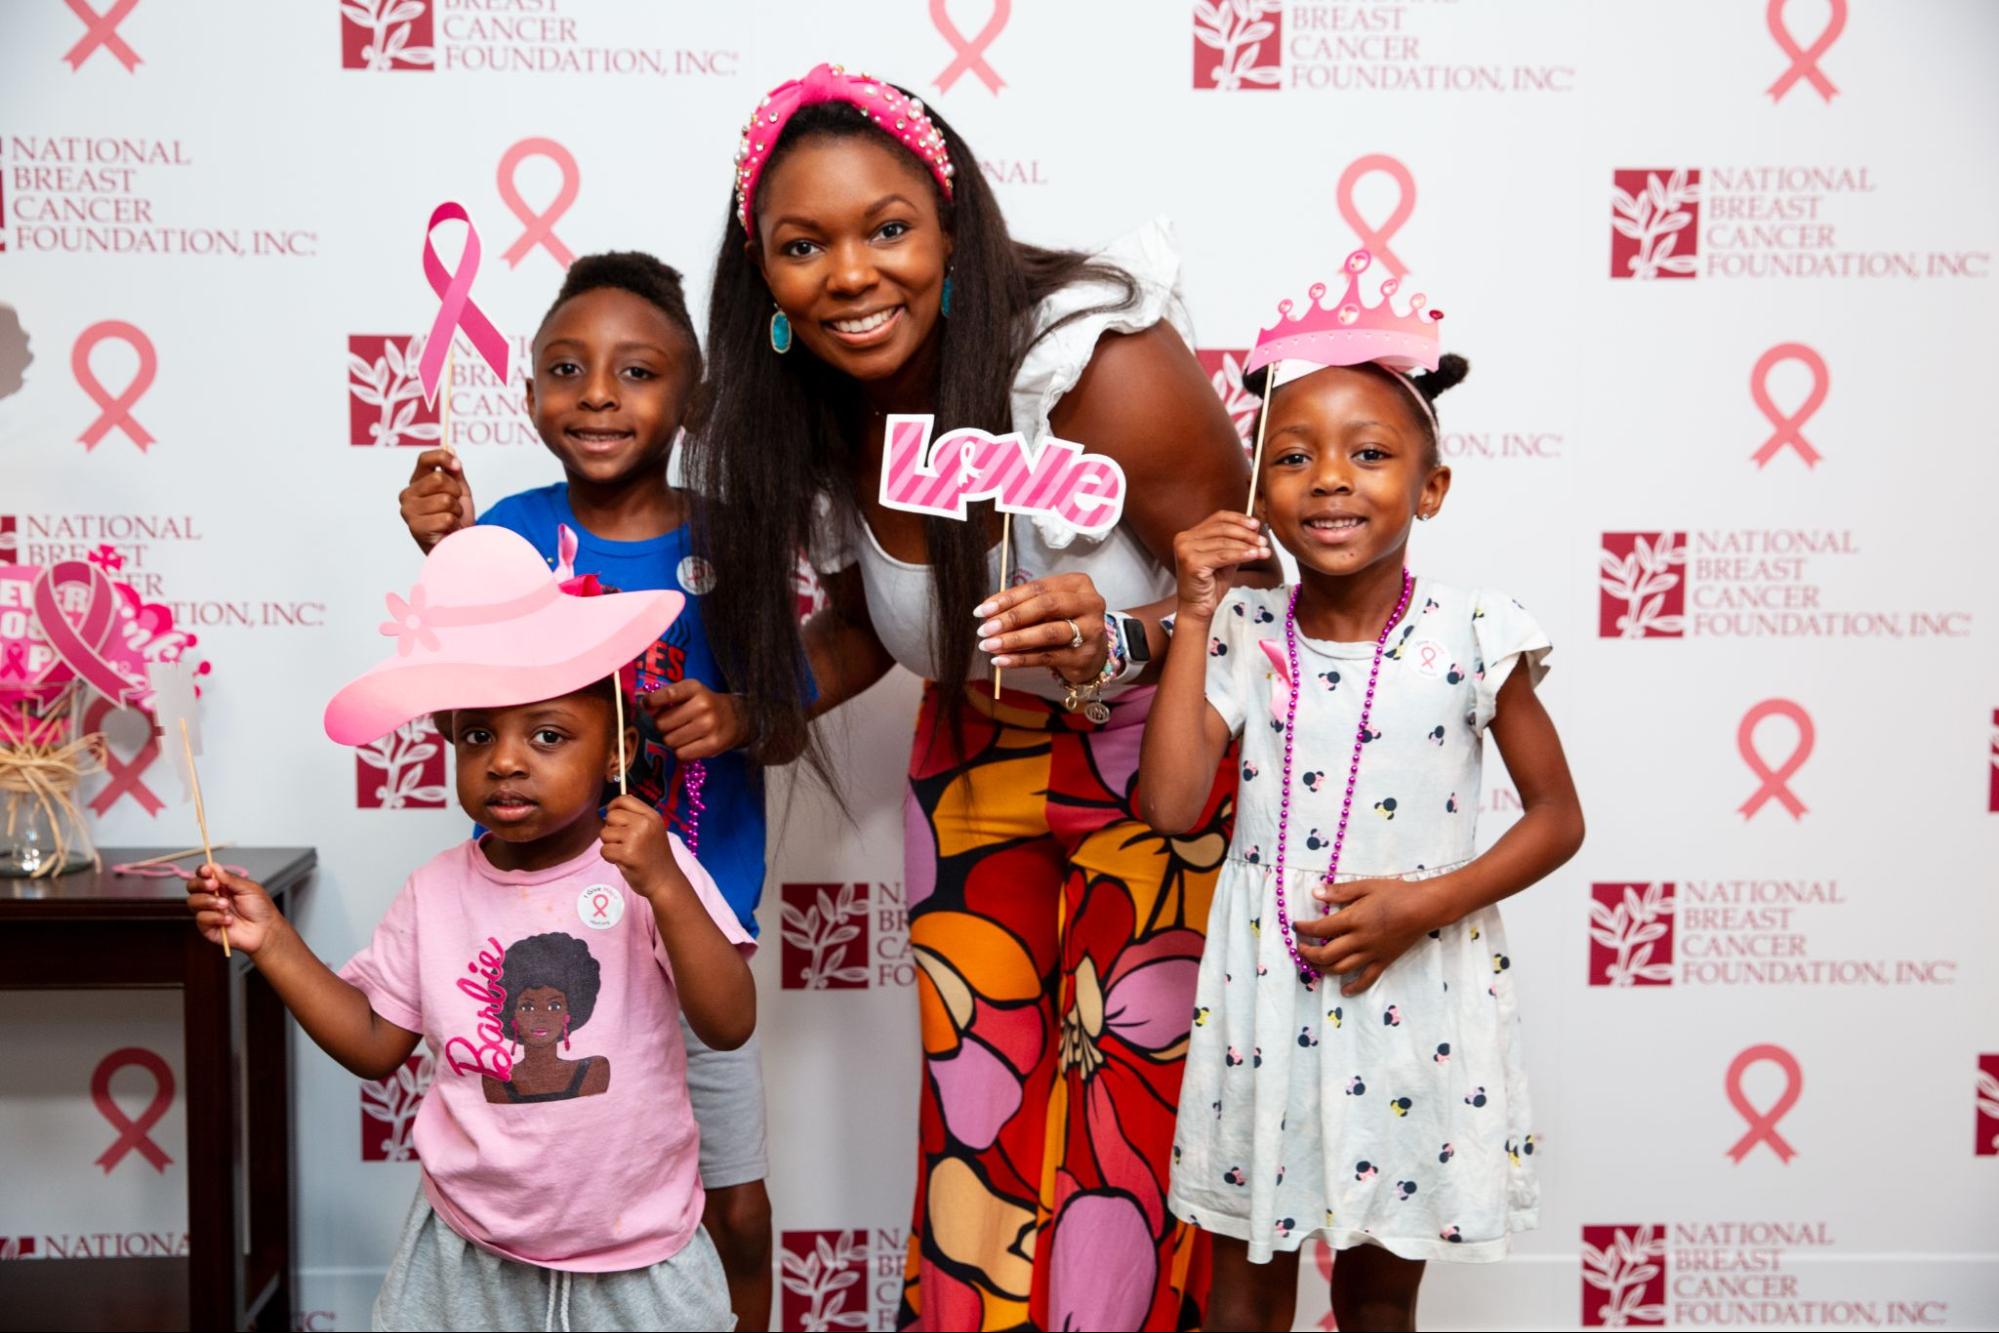 A family at a National Breast Cancer Foundation event.